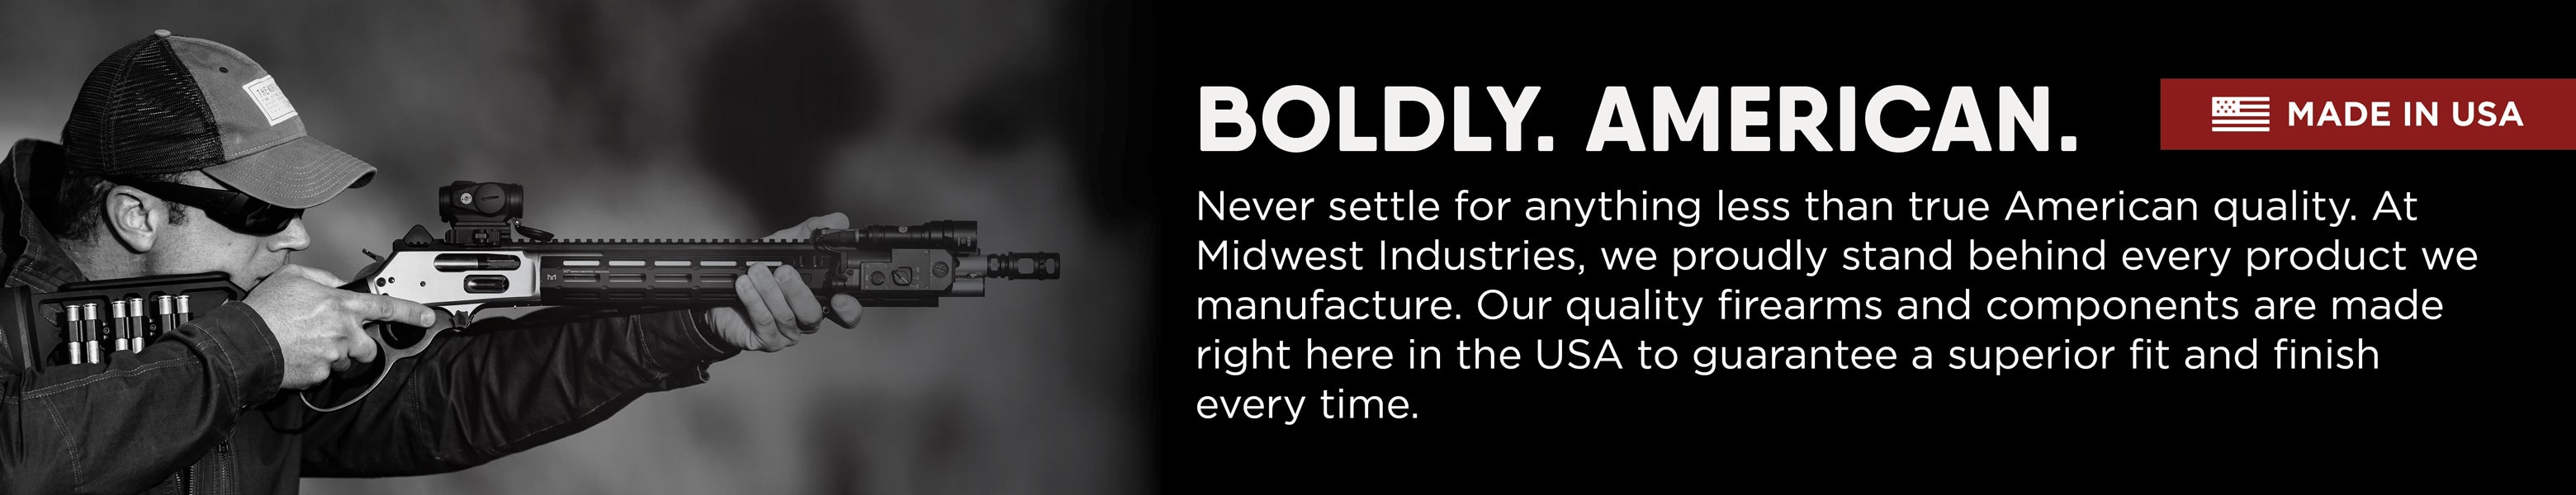 Boldly. American. Made in USA.